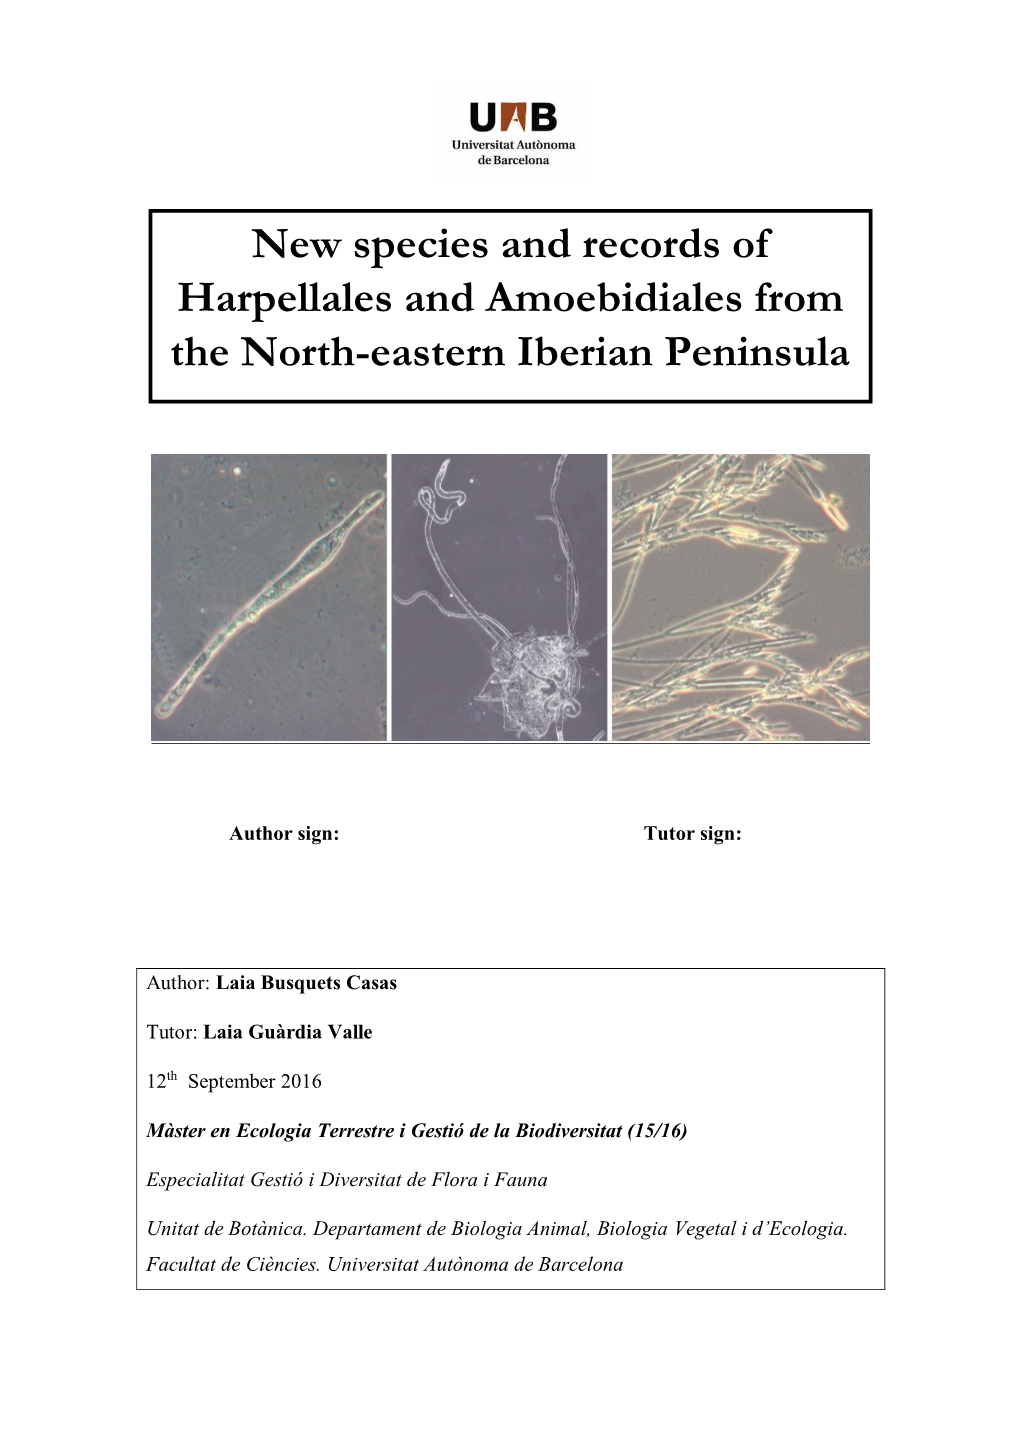 New Species and Records of Harpellales and Amoebidiales from the North-Eastern Iberian Peninsula